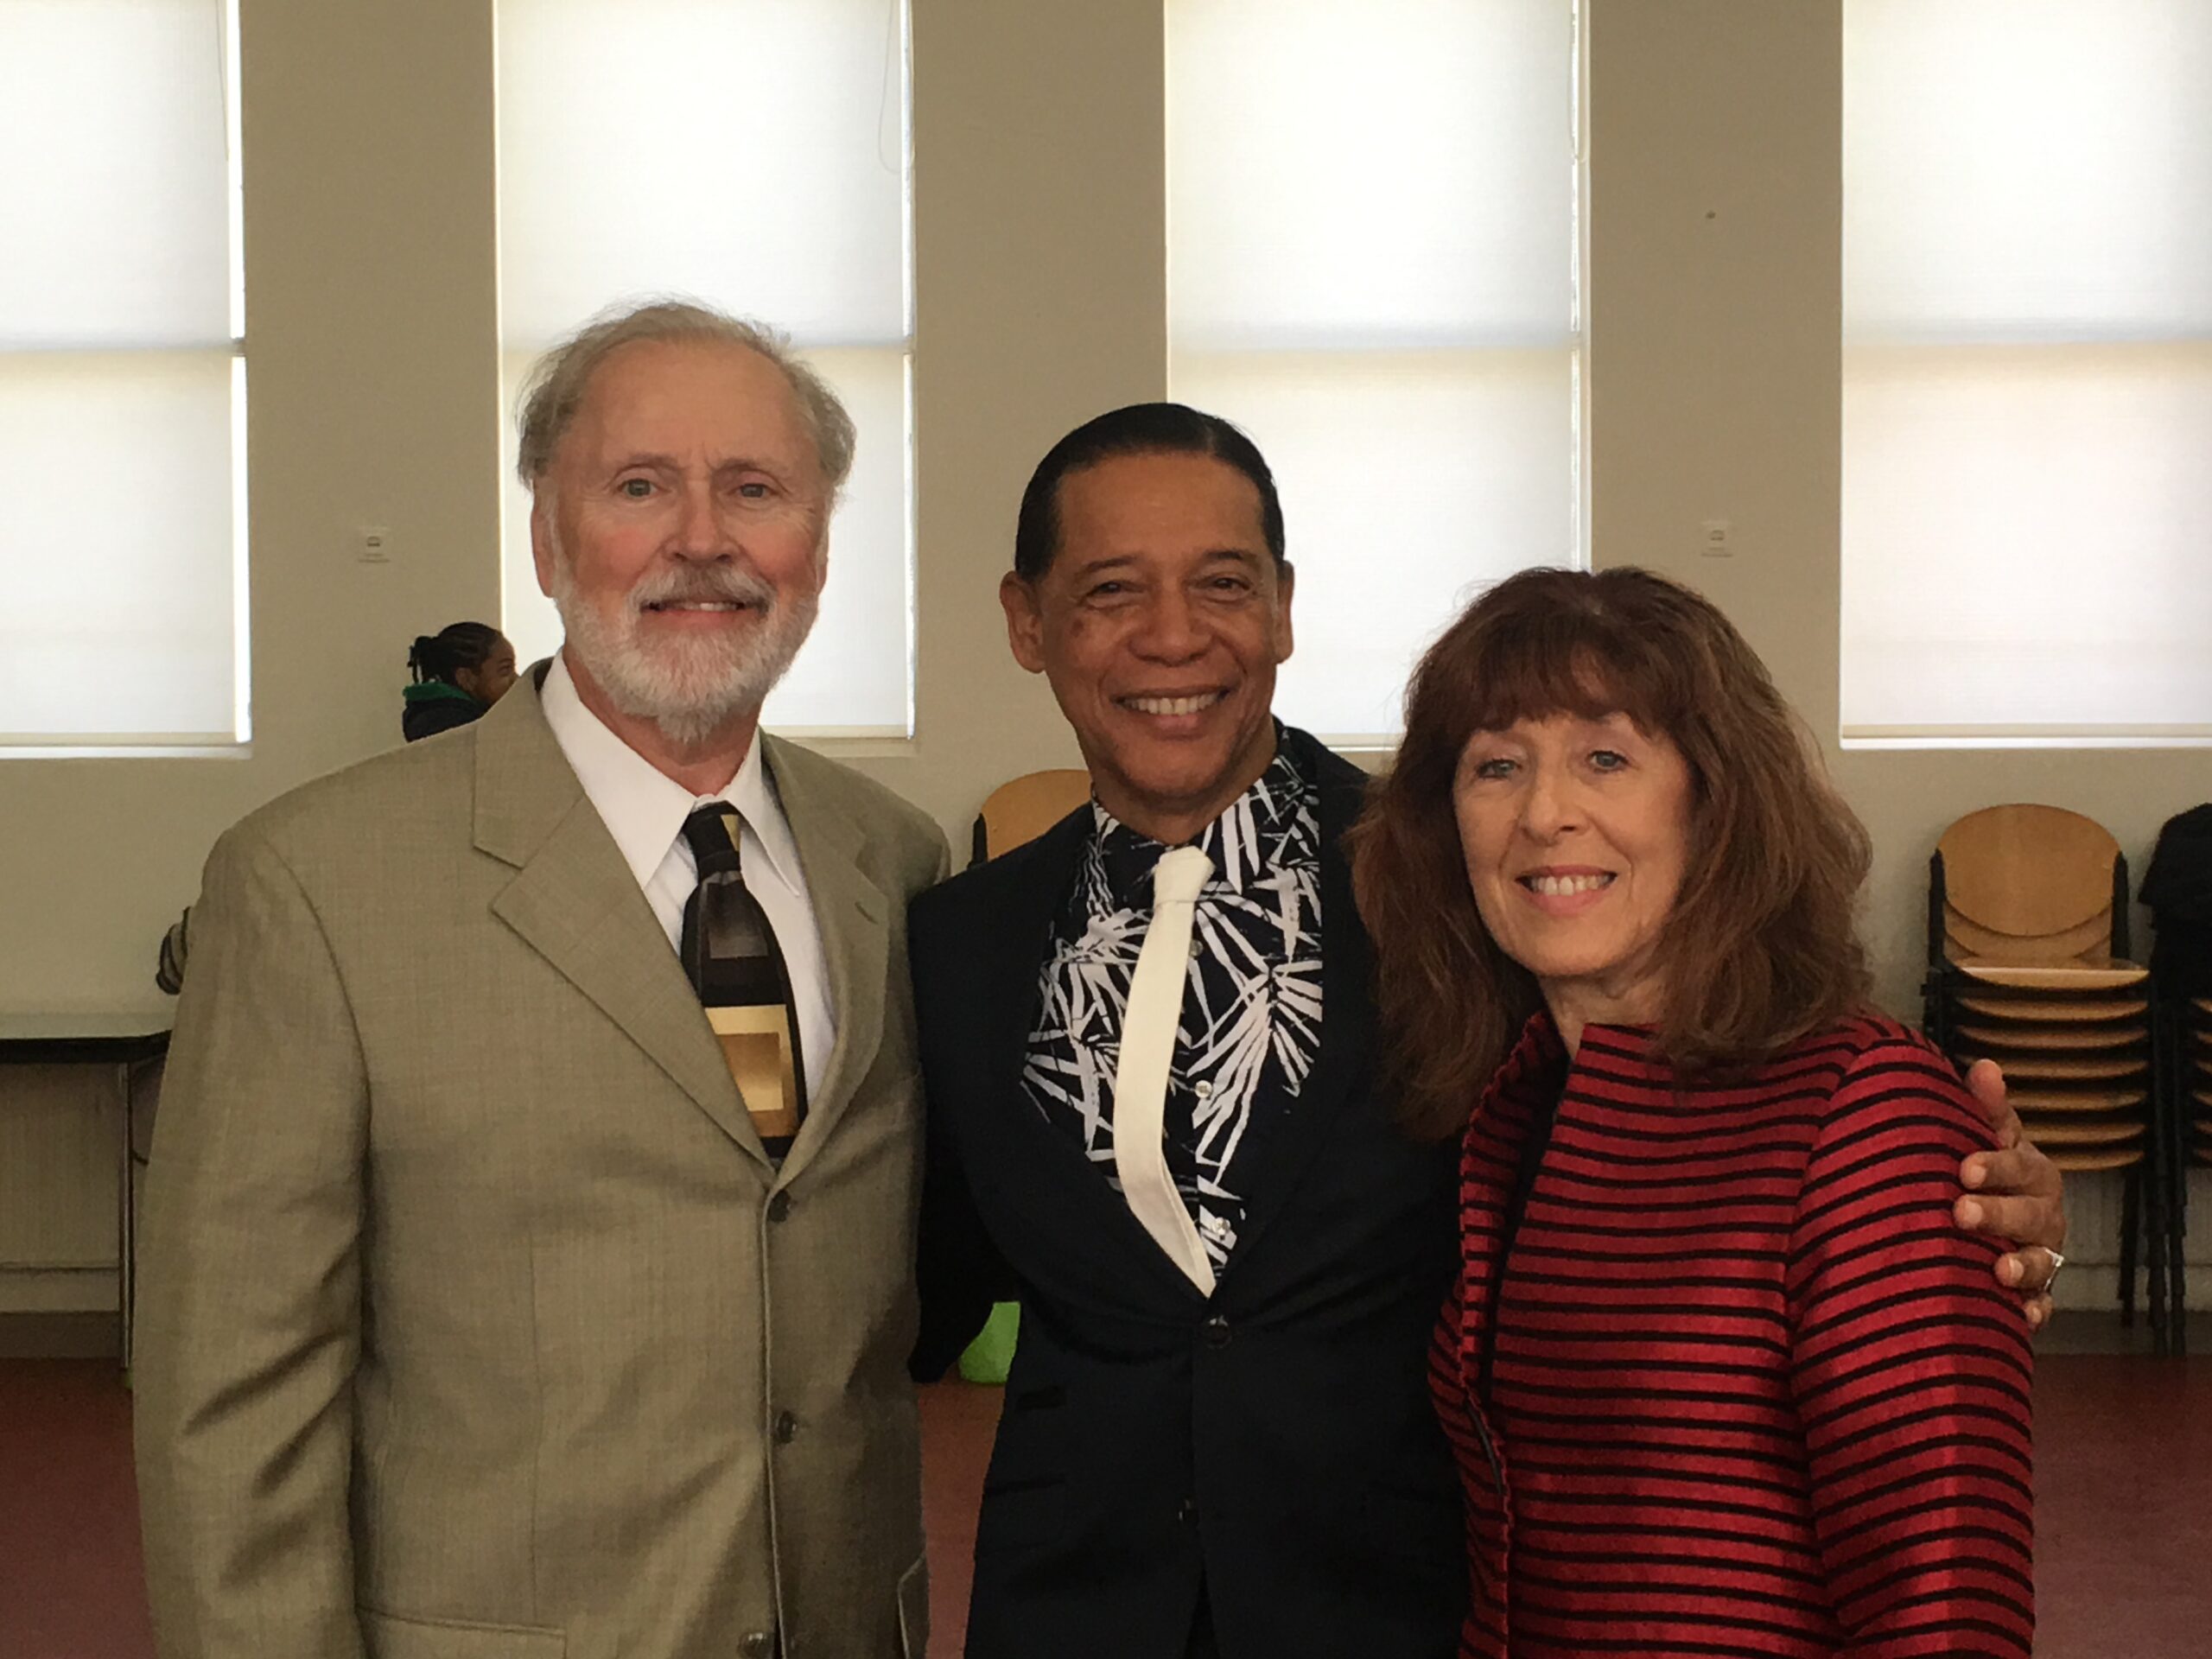 Pastors Gerald and Susan with Pastor Gerard from Maranatha Ministries, Amsterdam